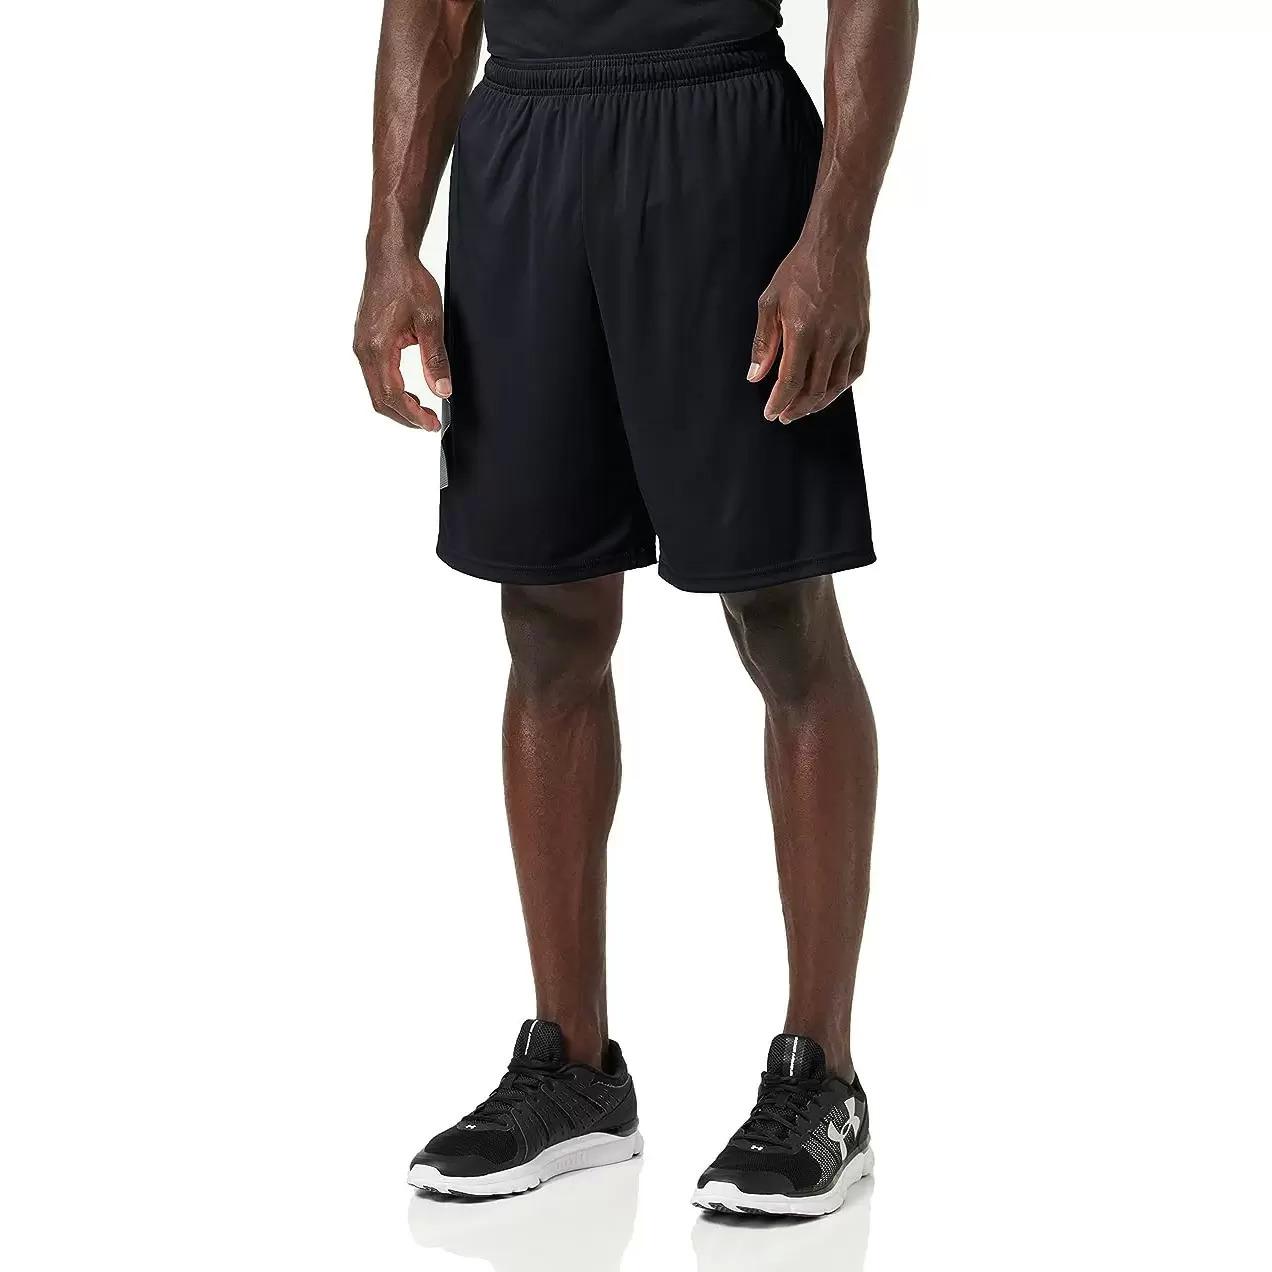 Under Armour Tech Graphic Short Pants for $11.84